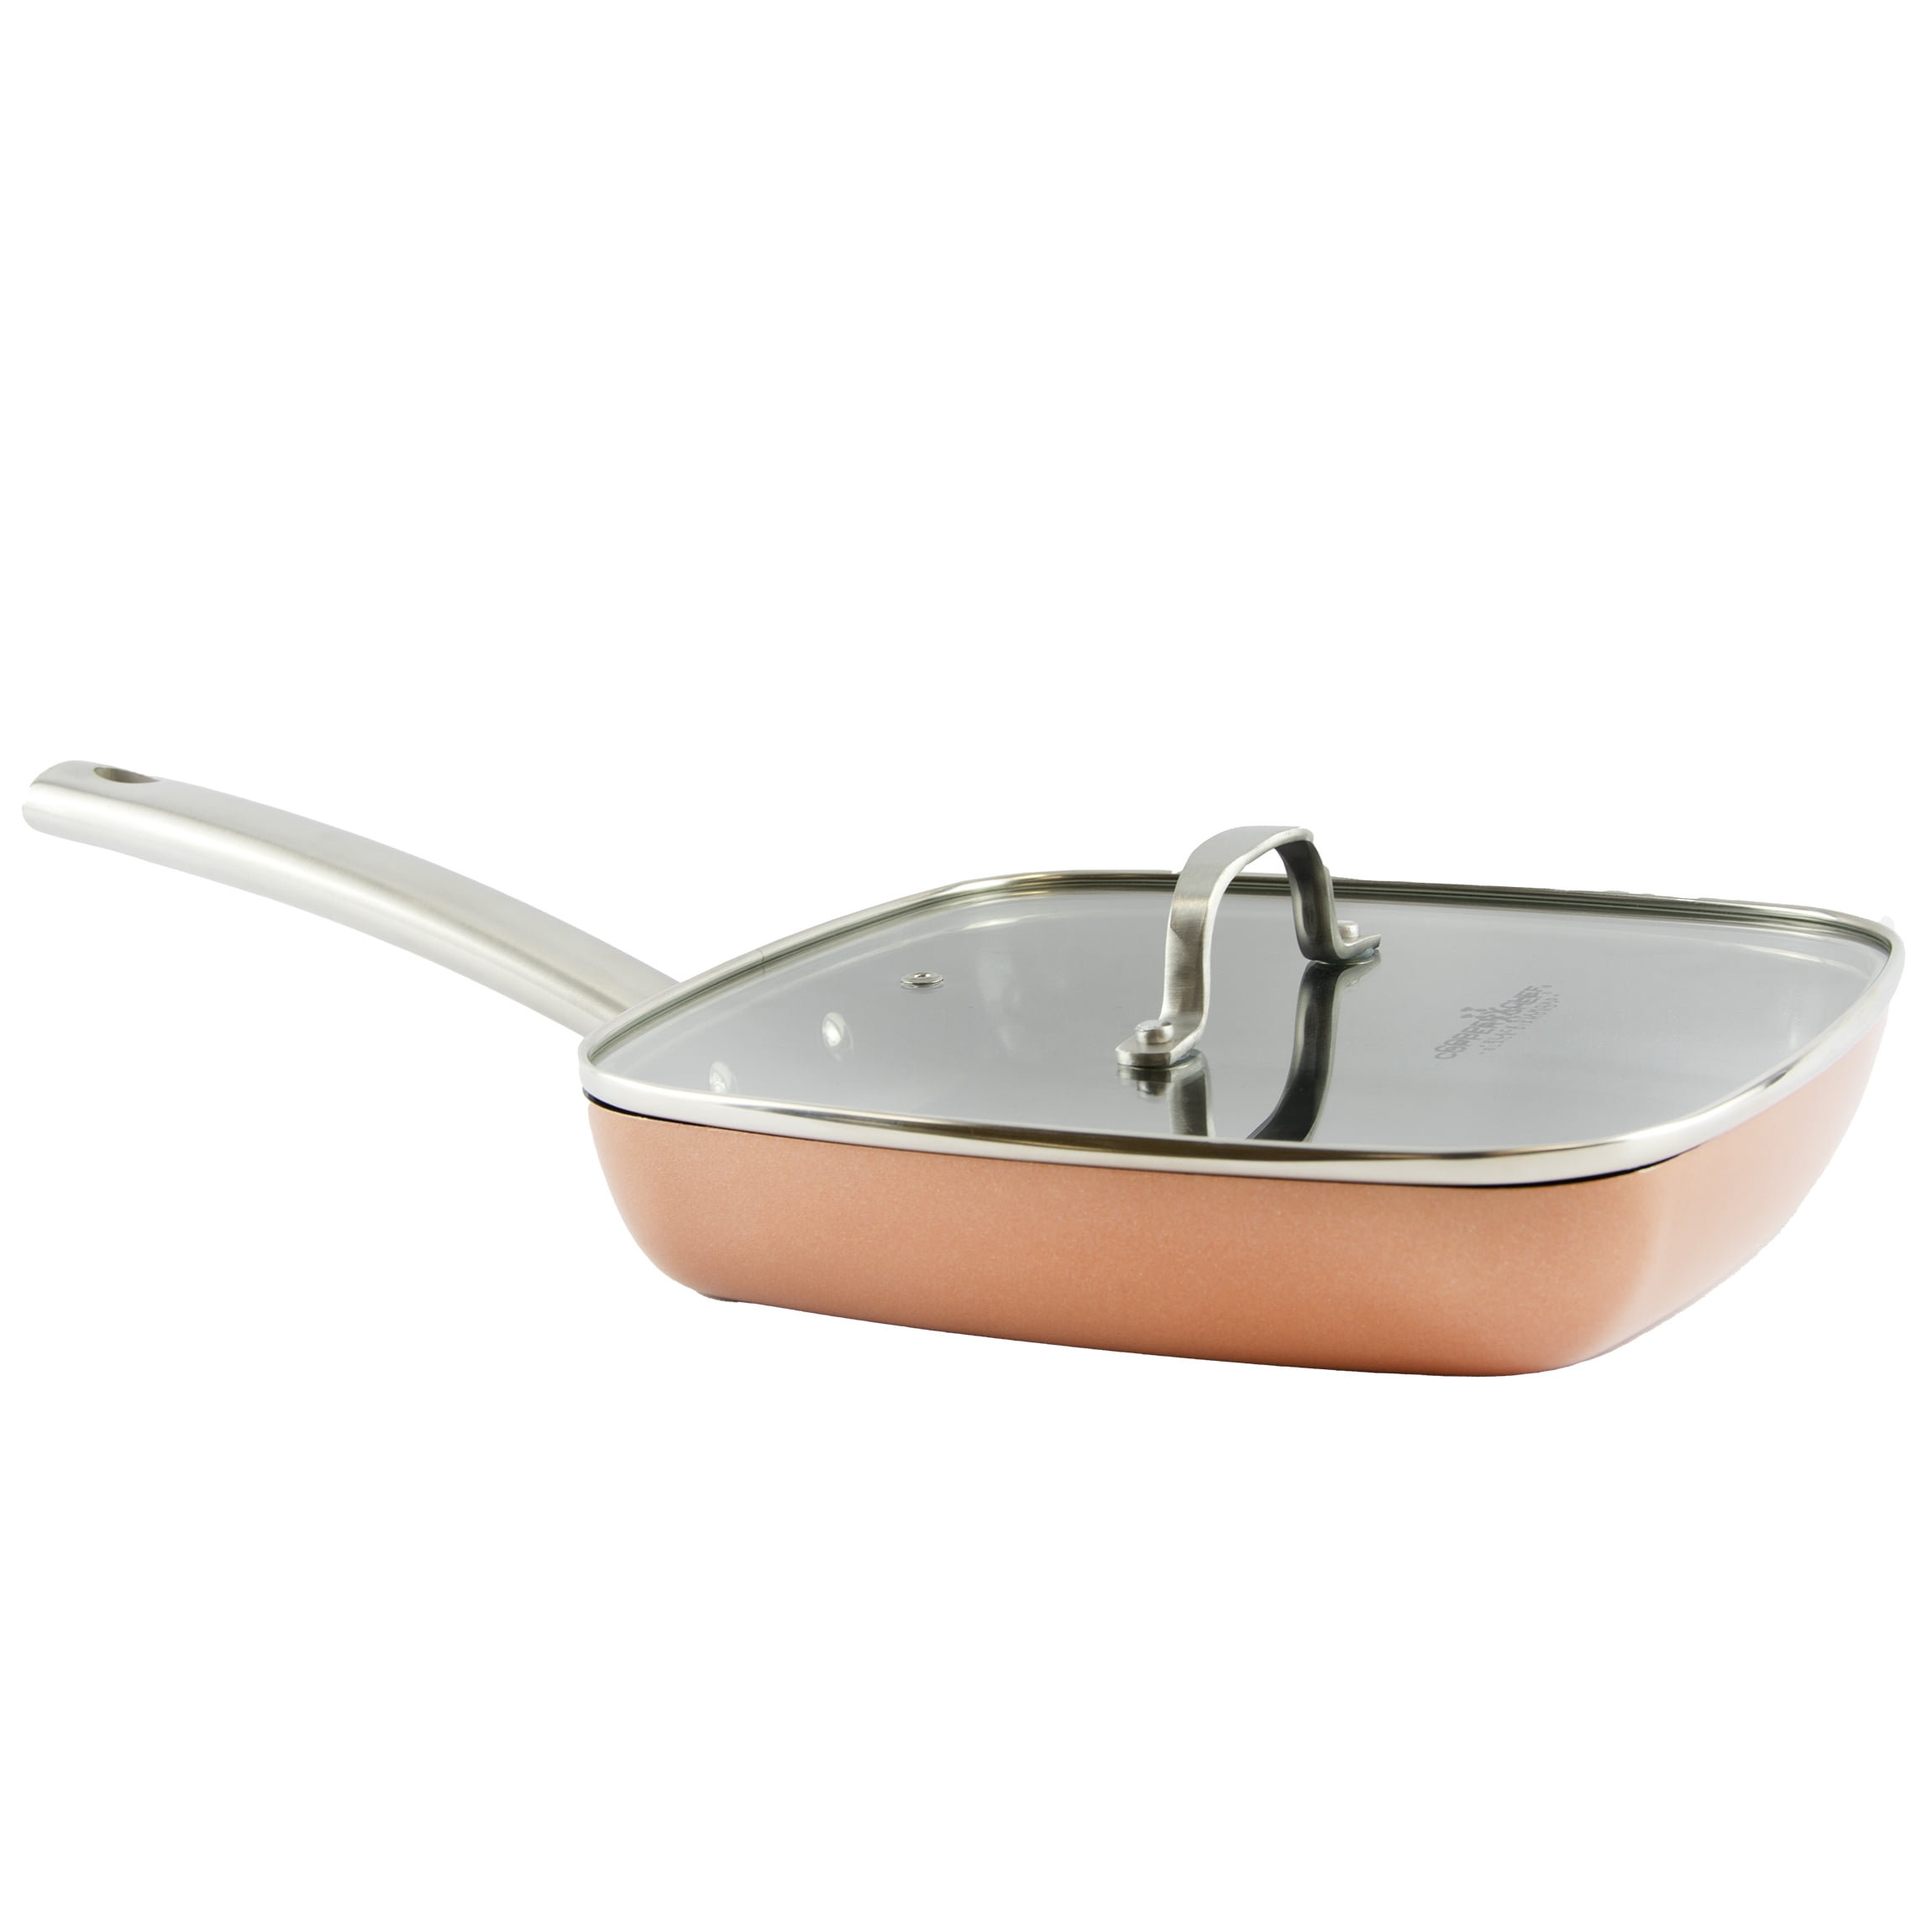 Copper Chef 9.5 S2 Square Frying Pan With Vented Glass Lid and Roaster